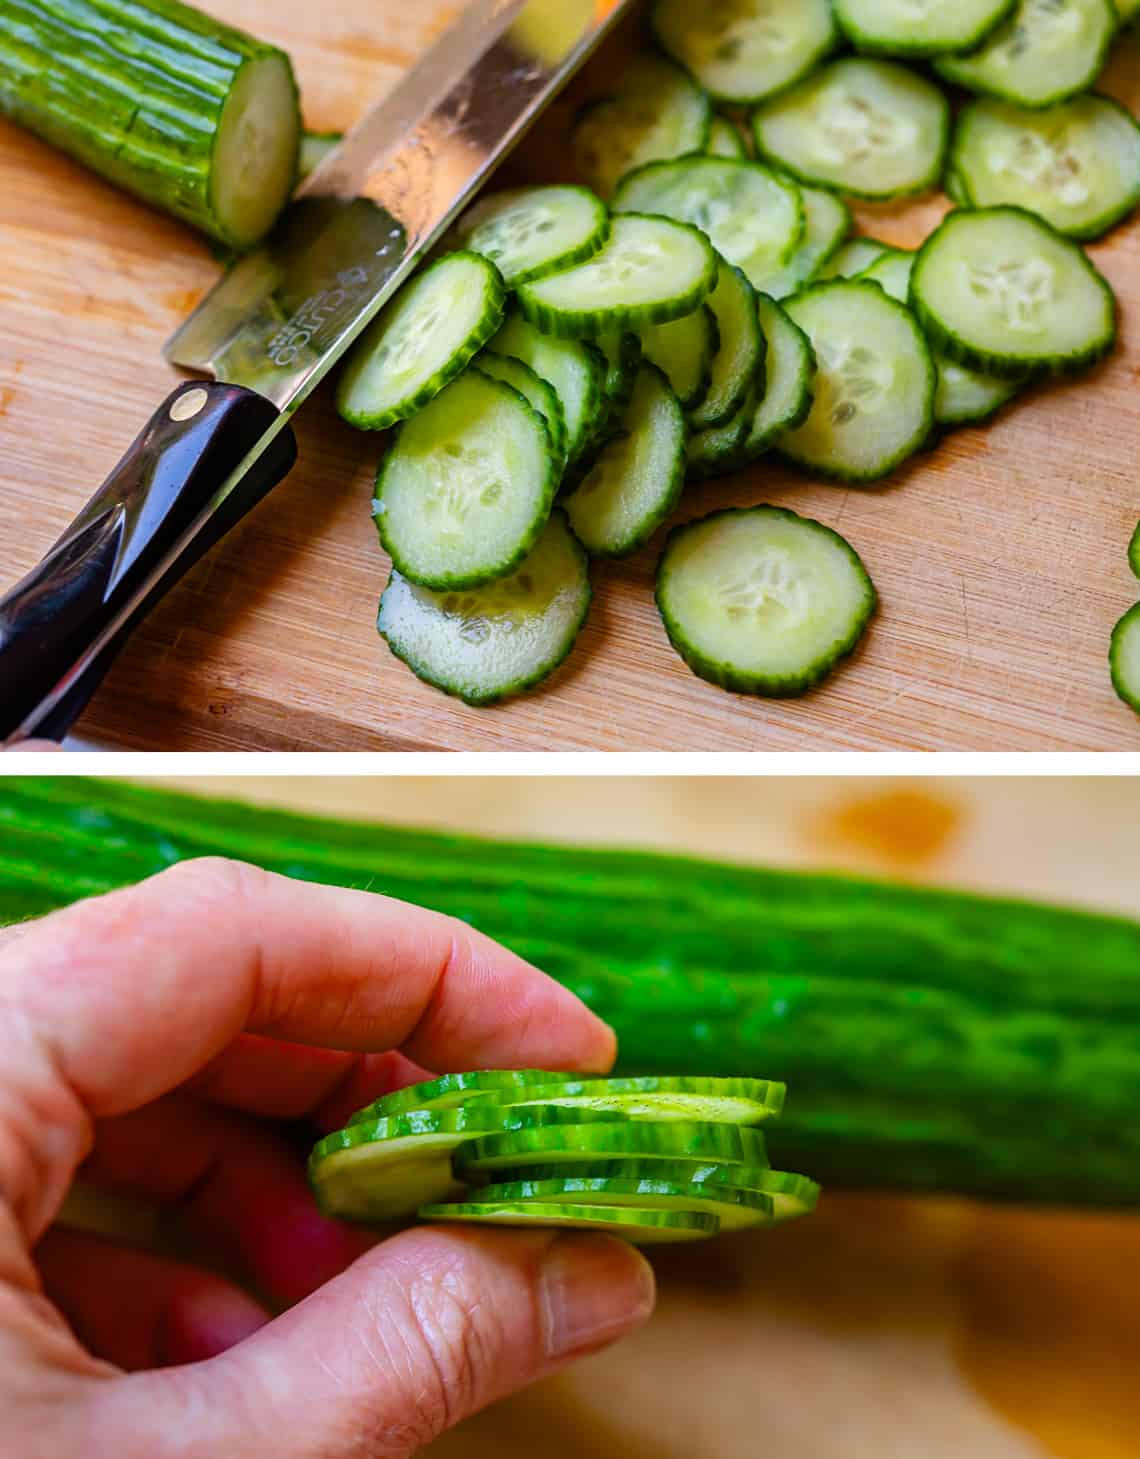 Slicing English cucumber with a chef's knife and demonstrating the thinness of the slices.